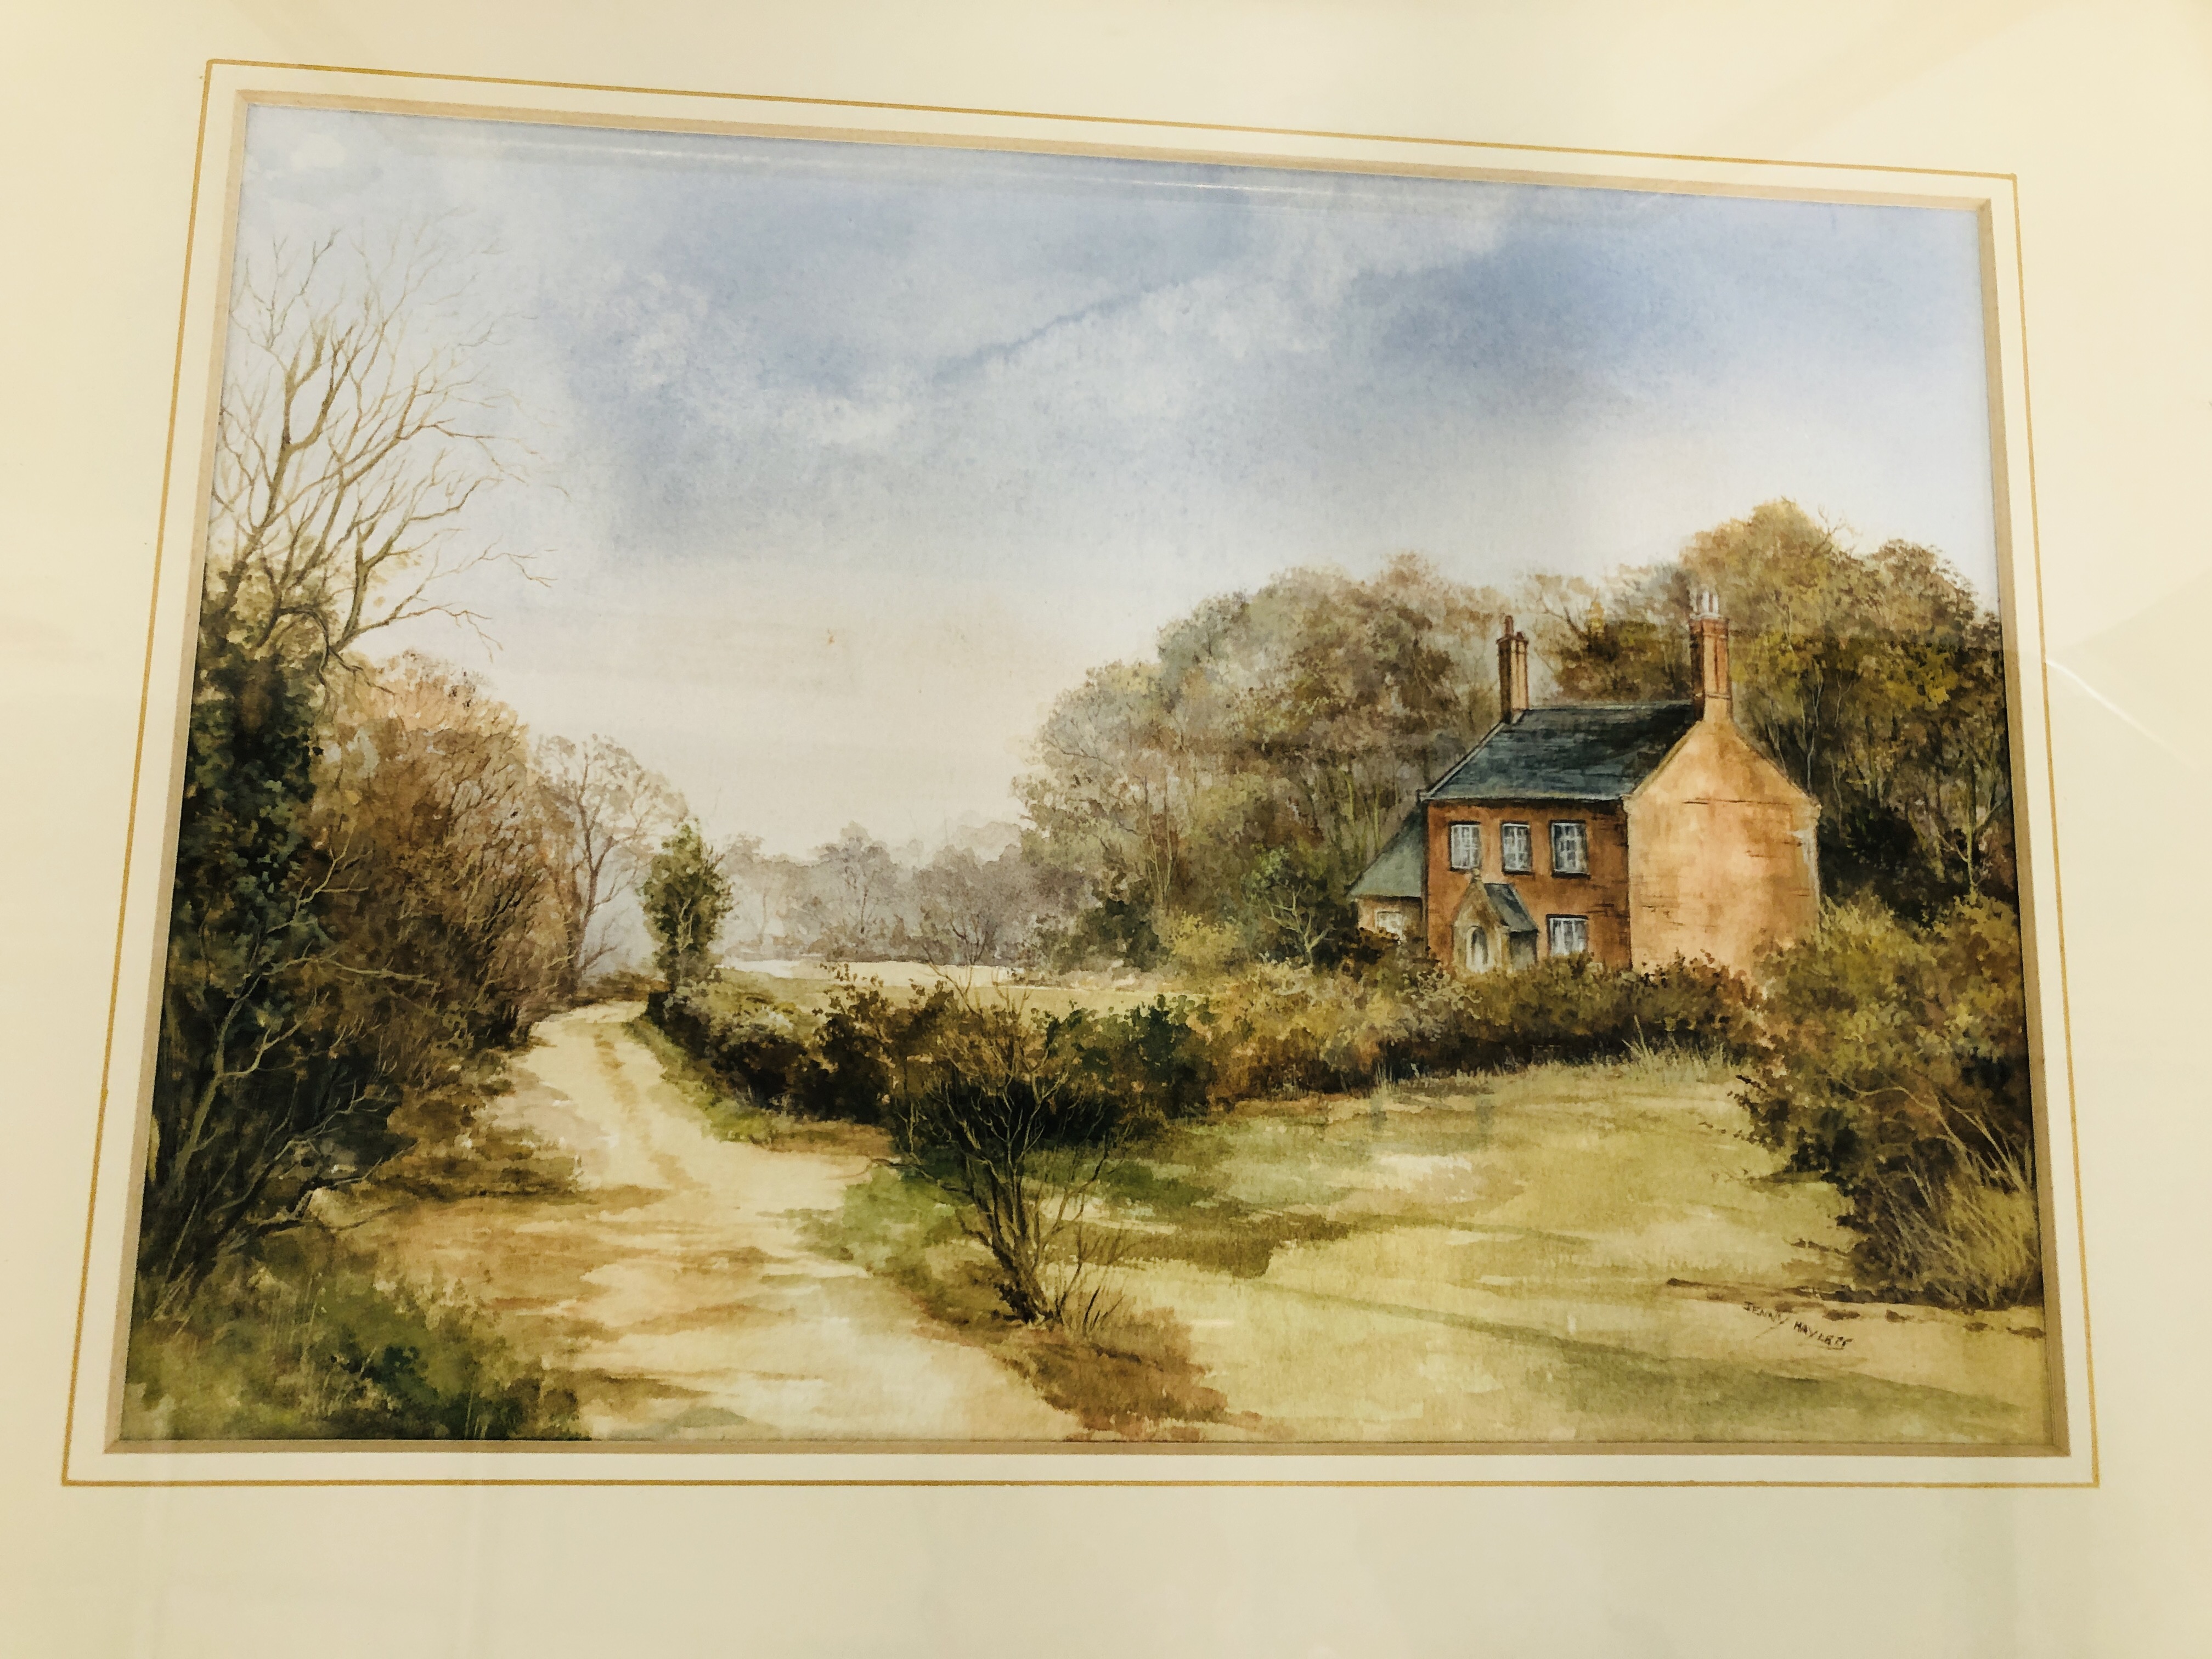 PAIR OF FRAMED WATERCOLOURS BEARING SIGNATURE "JENNY HAYLETT" THE GAMEKEEPERS COTTAGE WINTERTON AND - Image 5 of 11